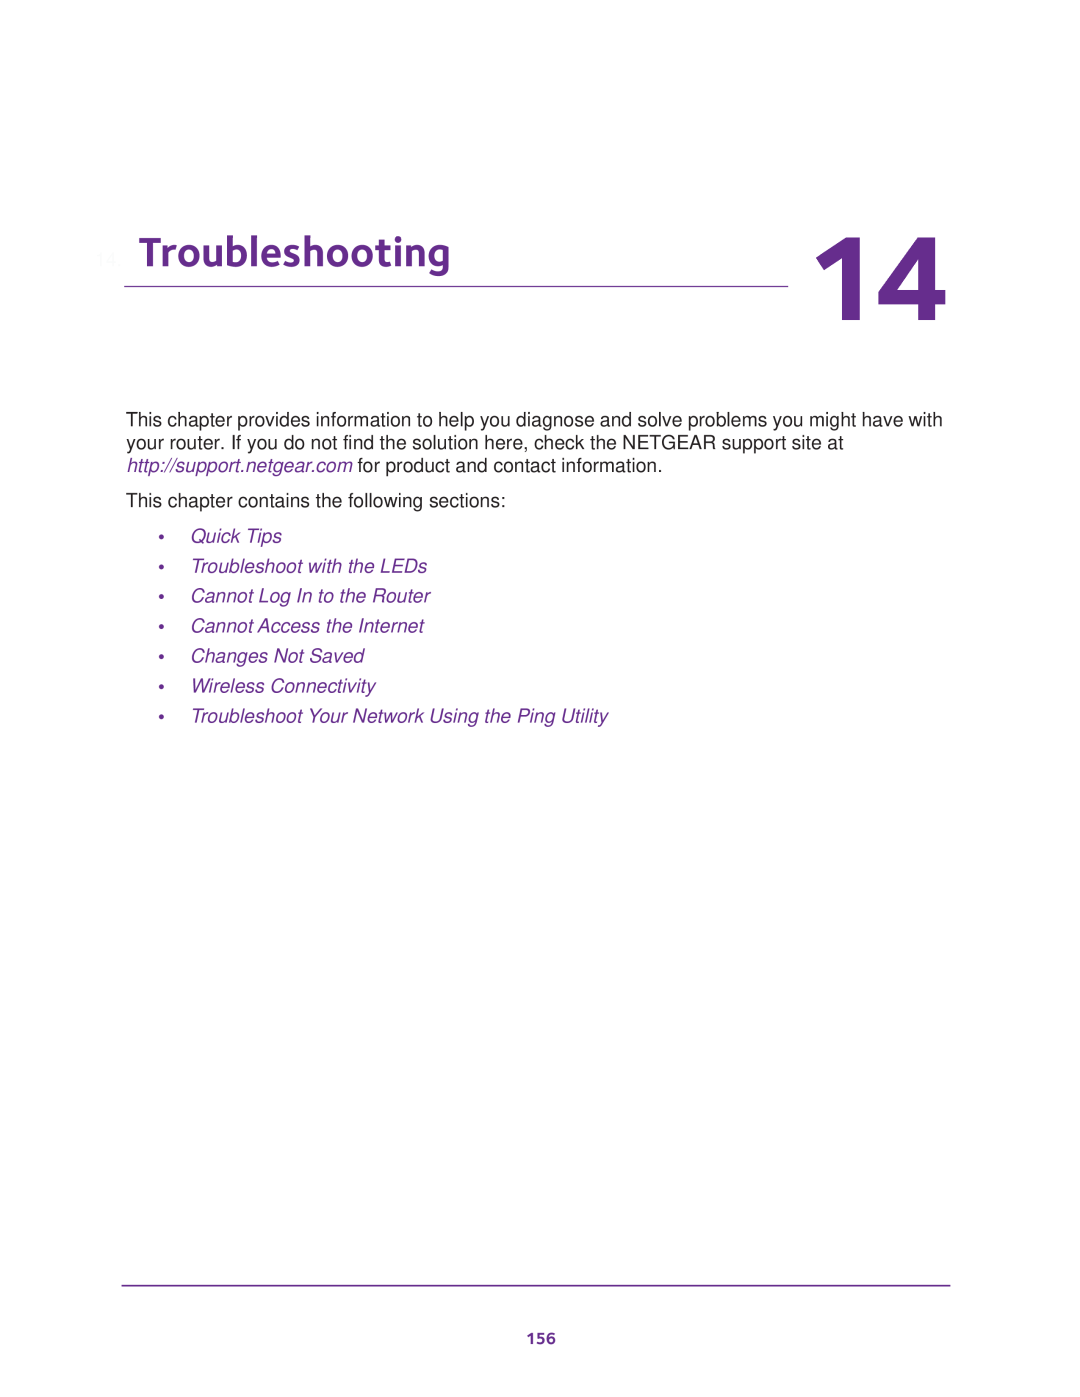 NETGEAR Model R7000 user manual Troubleshooting, Quick Tips Troubleshoot with the LEDs Cannot Log In to the Router 